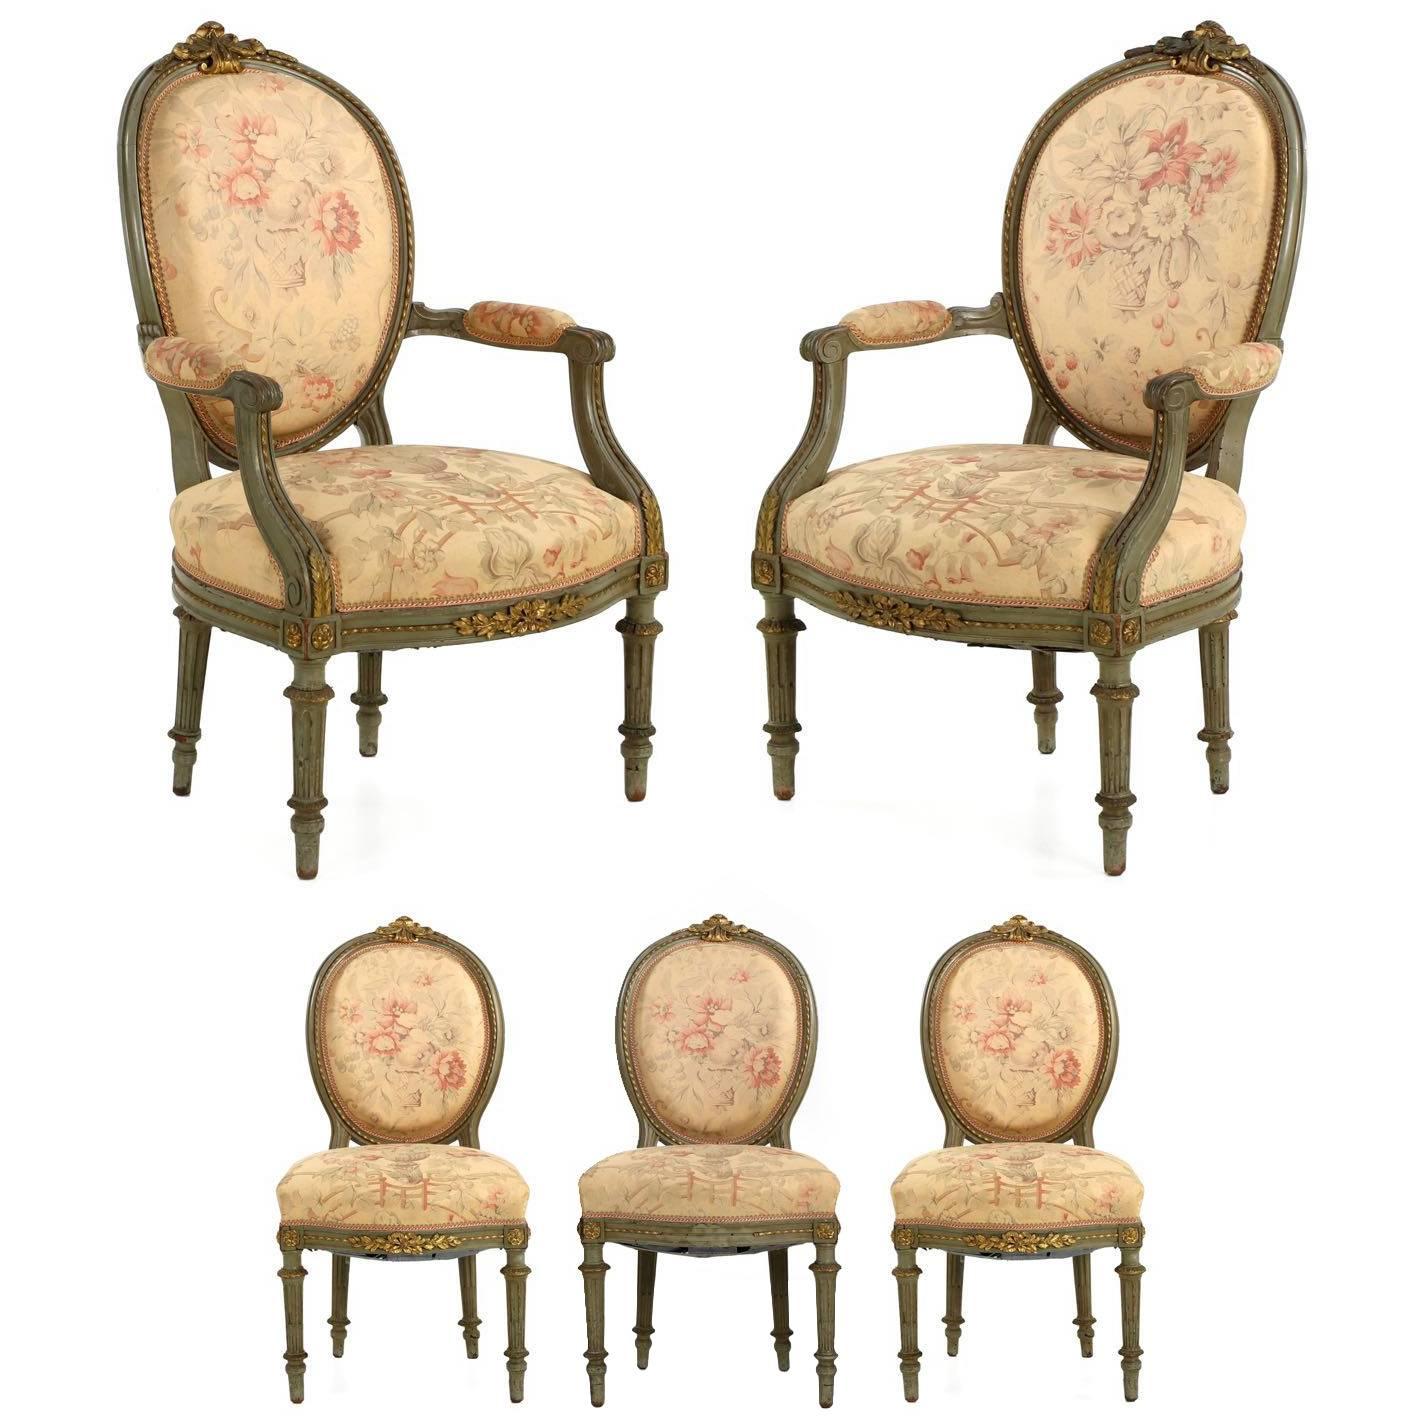 Set of Five French Louis XVI Style Antique Side and Armchairs, 19th Century